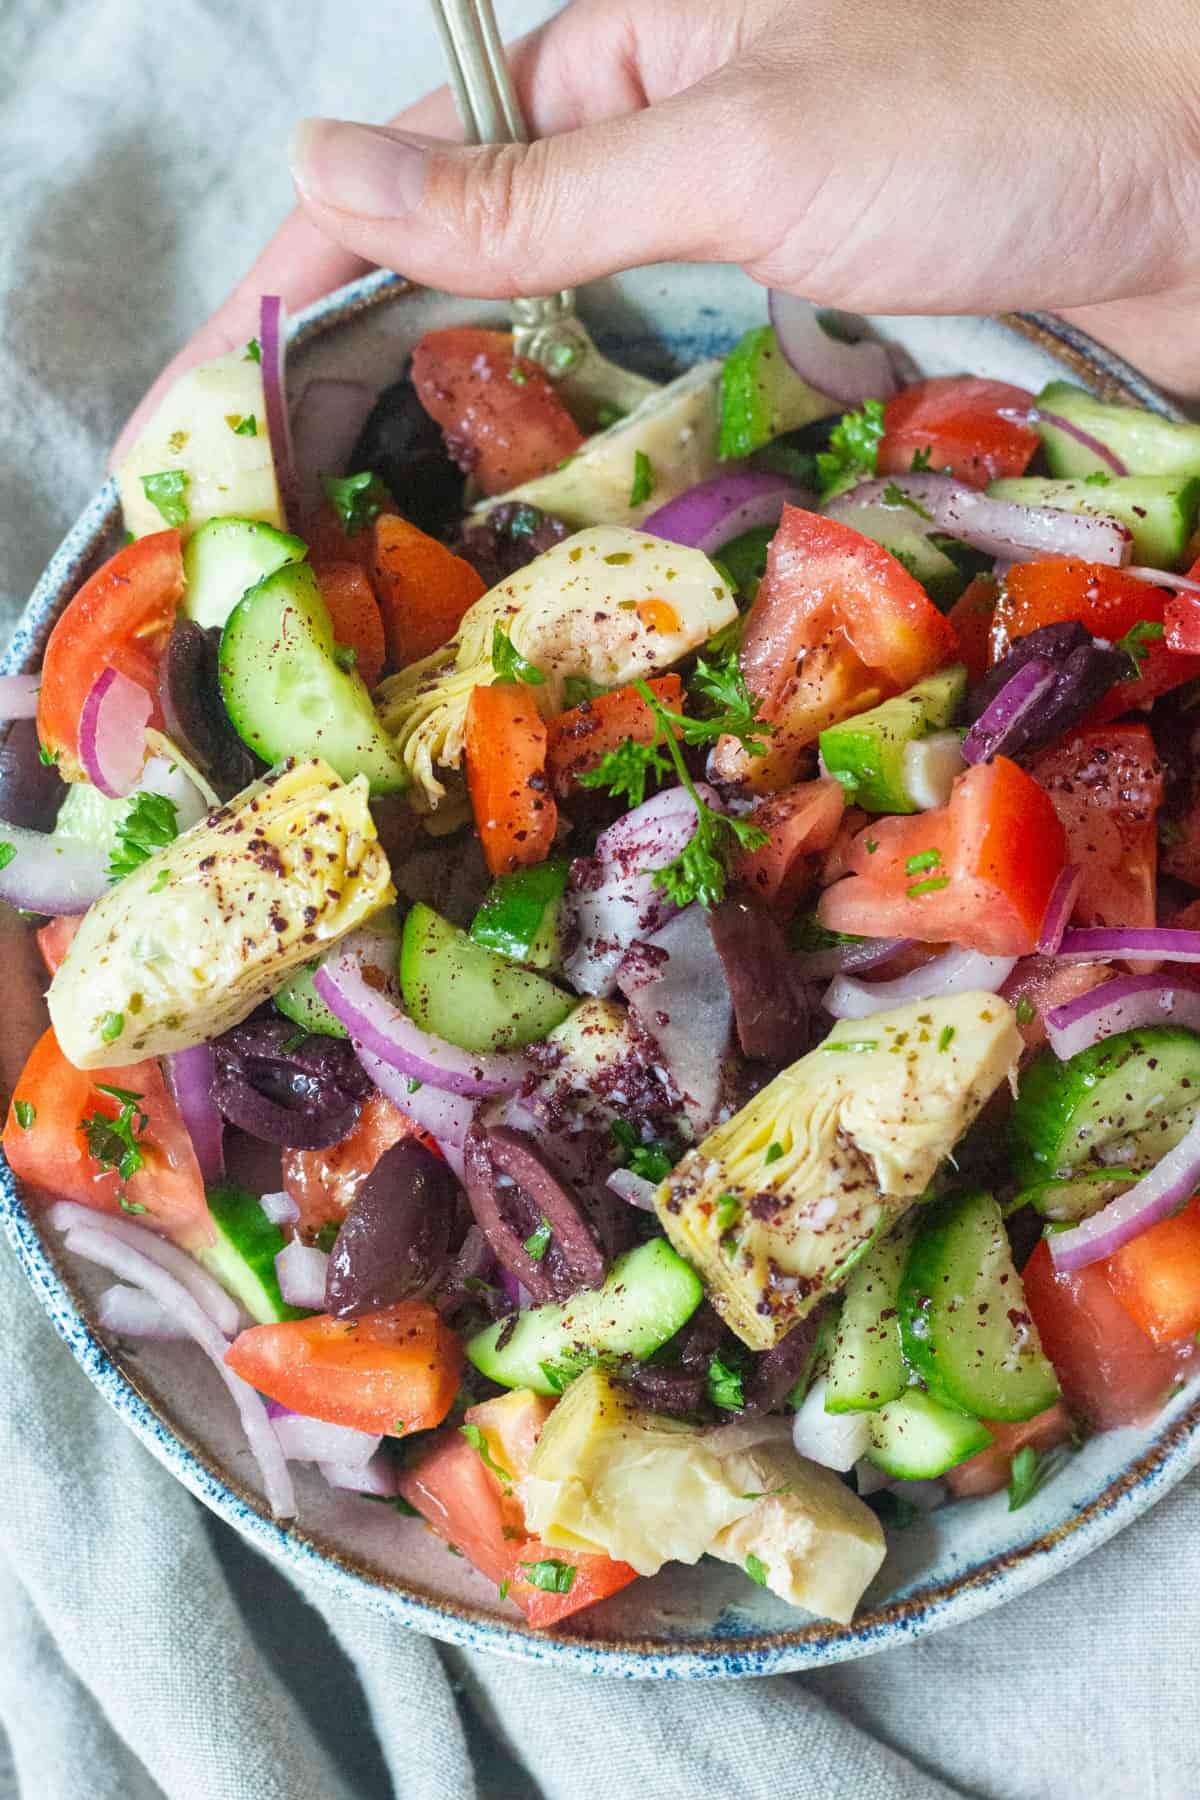 This Mediterranean salad is loaded with fresh vegetables such as cucumbers, tomatoes and herbs. This fresh salad is flavored with a delicious dressing.
v